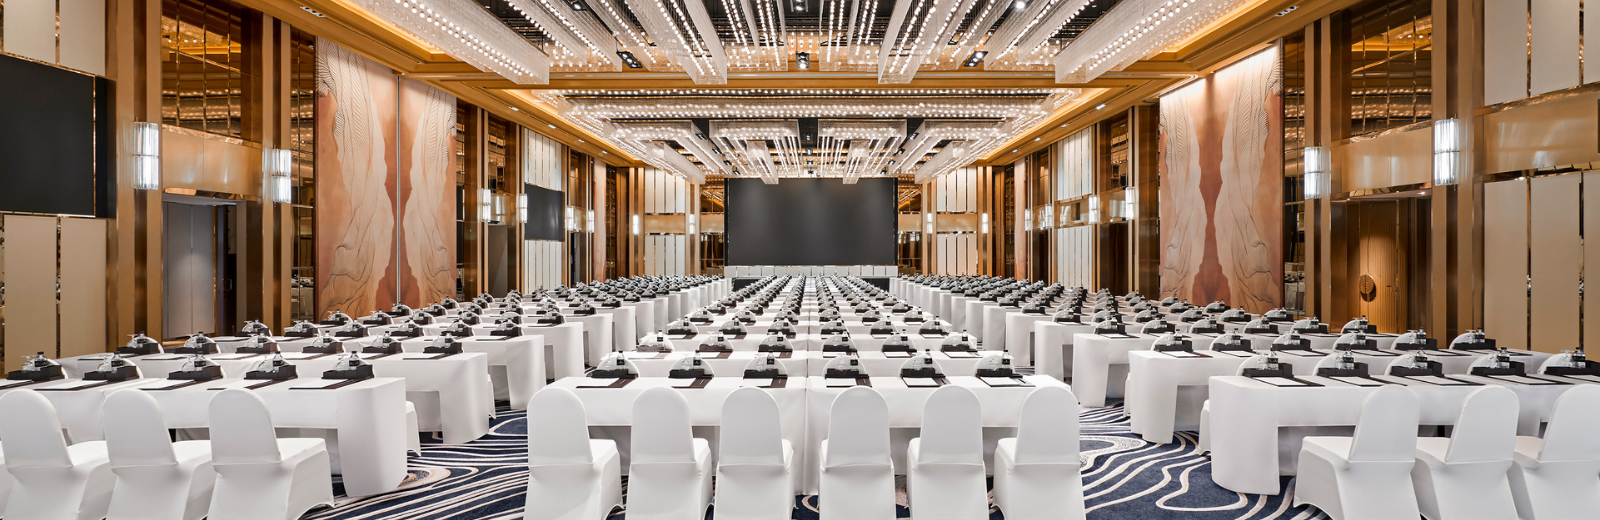 InterContinental Saigon luxury modern meetings and events with multiple event spaces venues